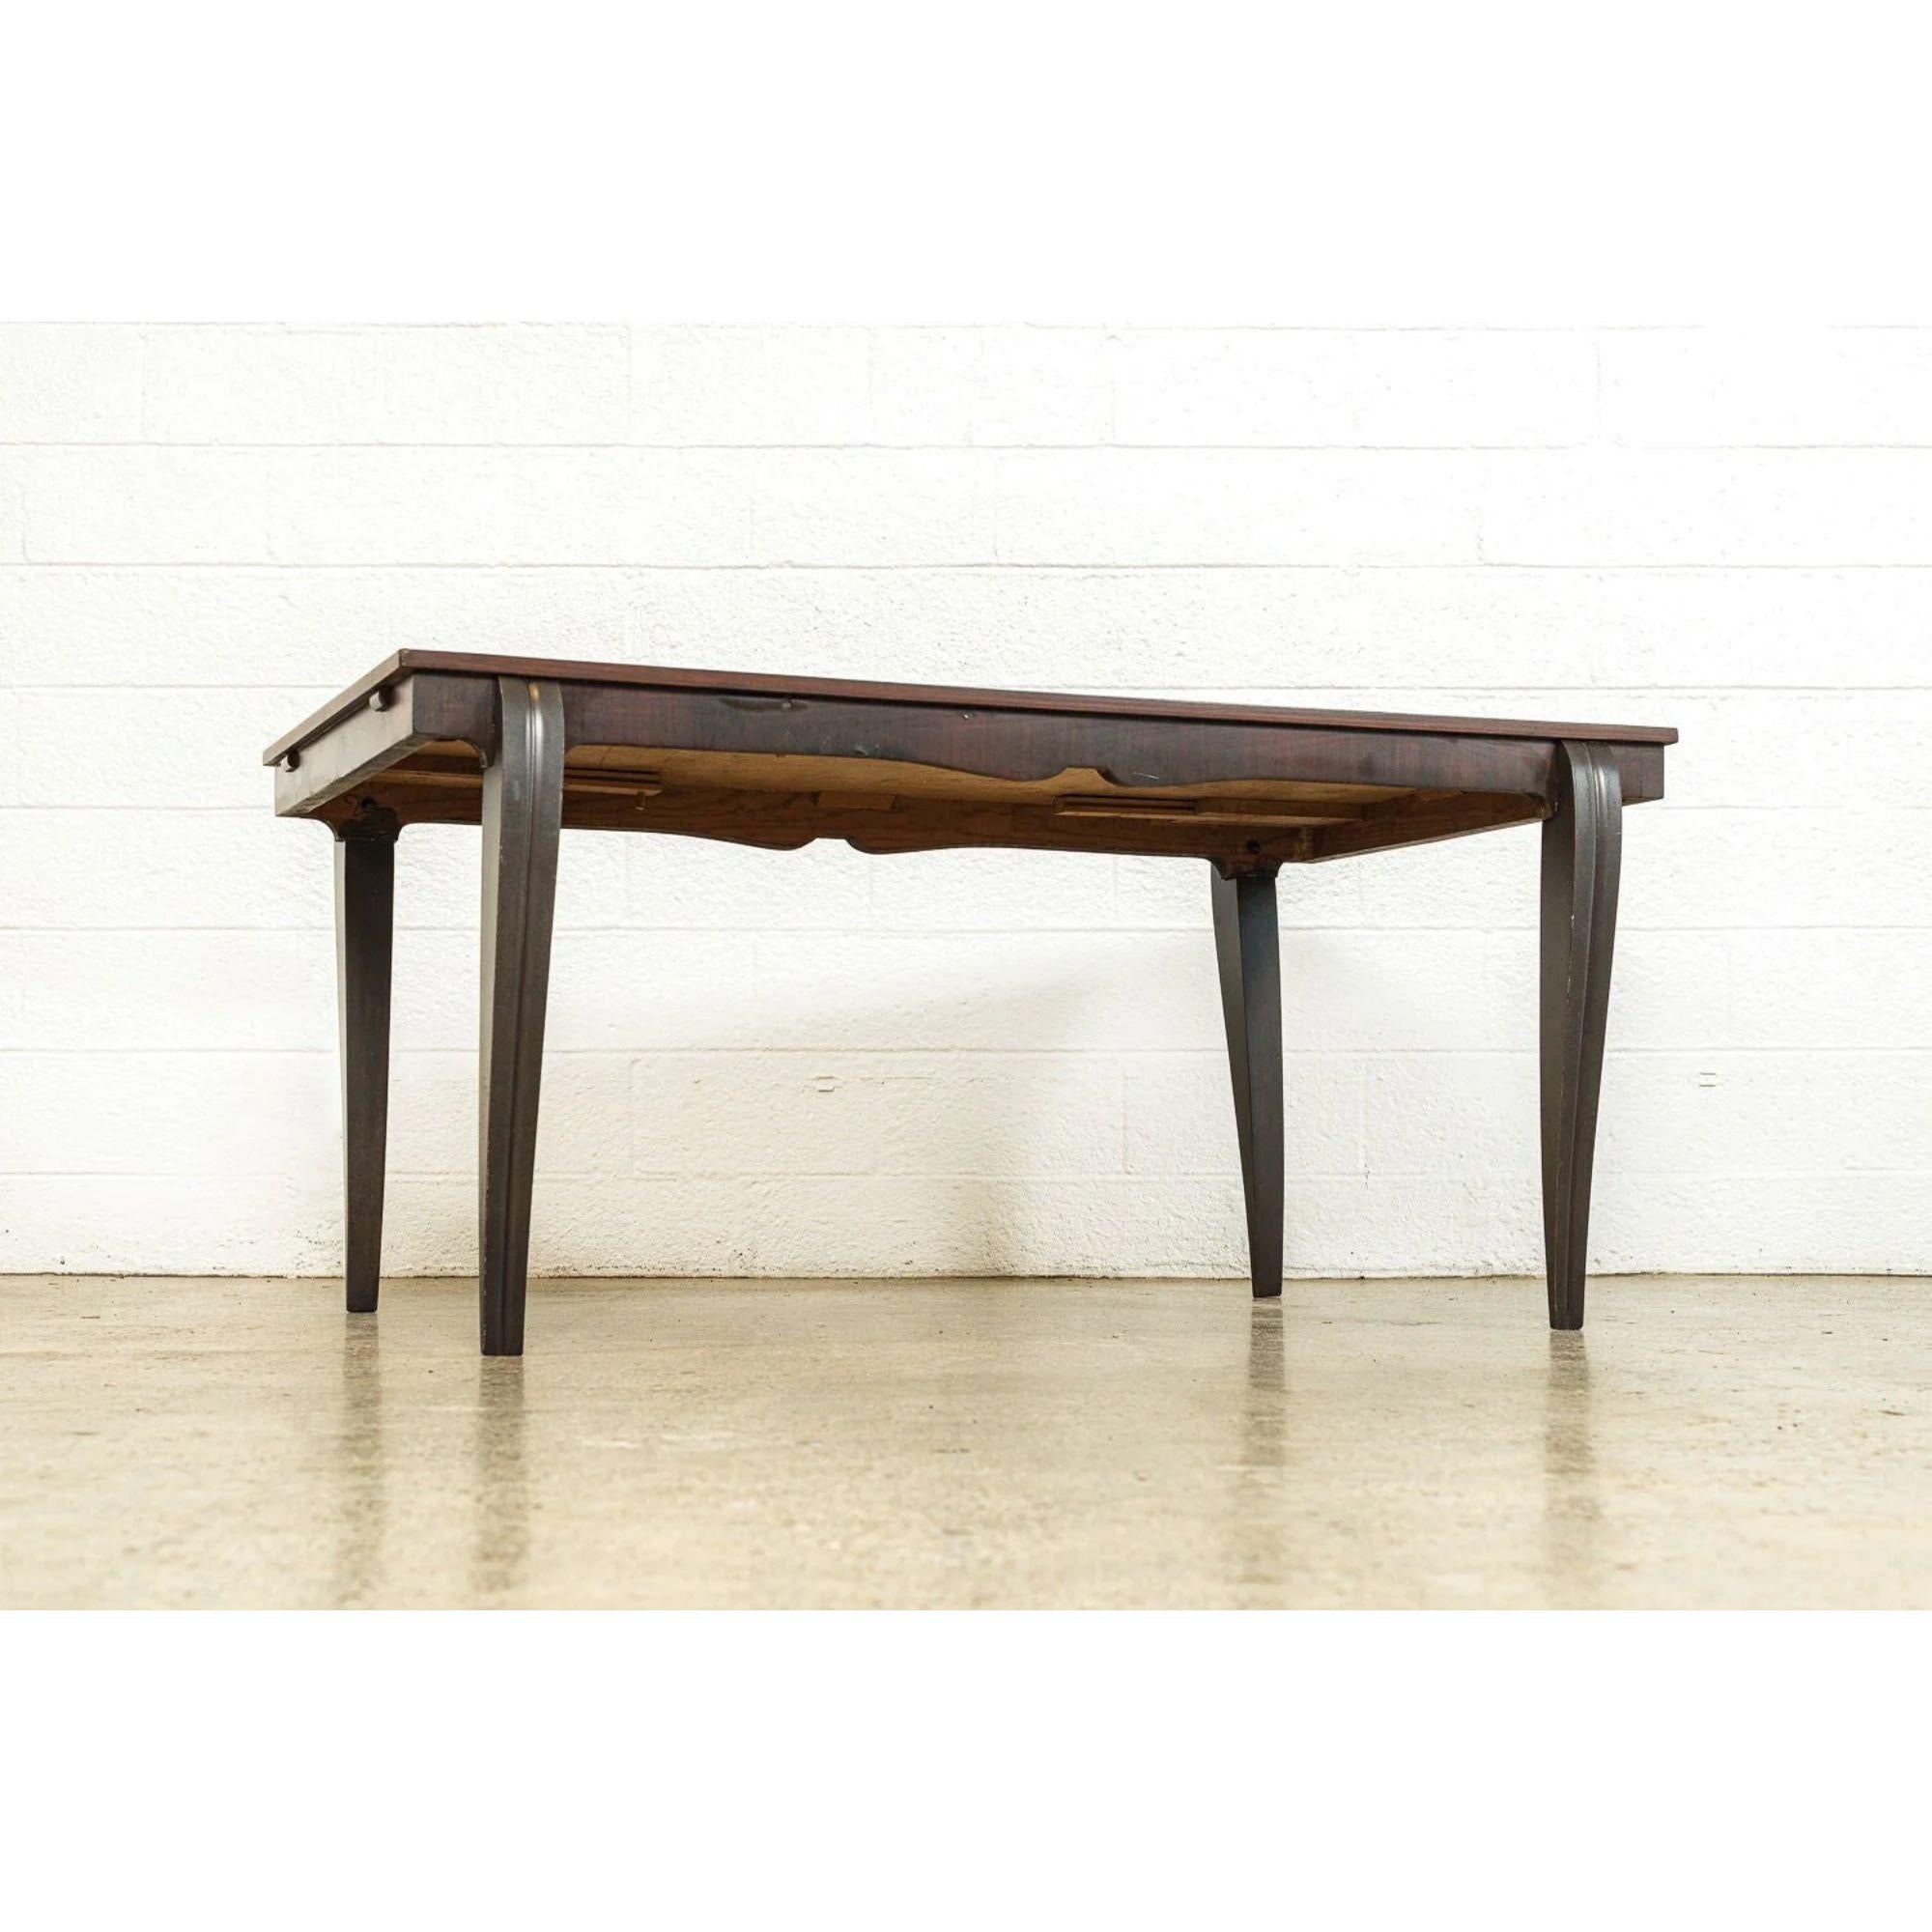 Antique French Art Deco Dining Table or Writing Desk in Mahogany Wood, 1930s For Sale 1